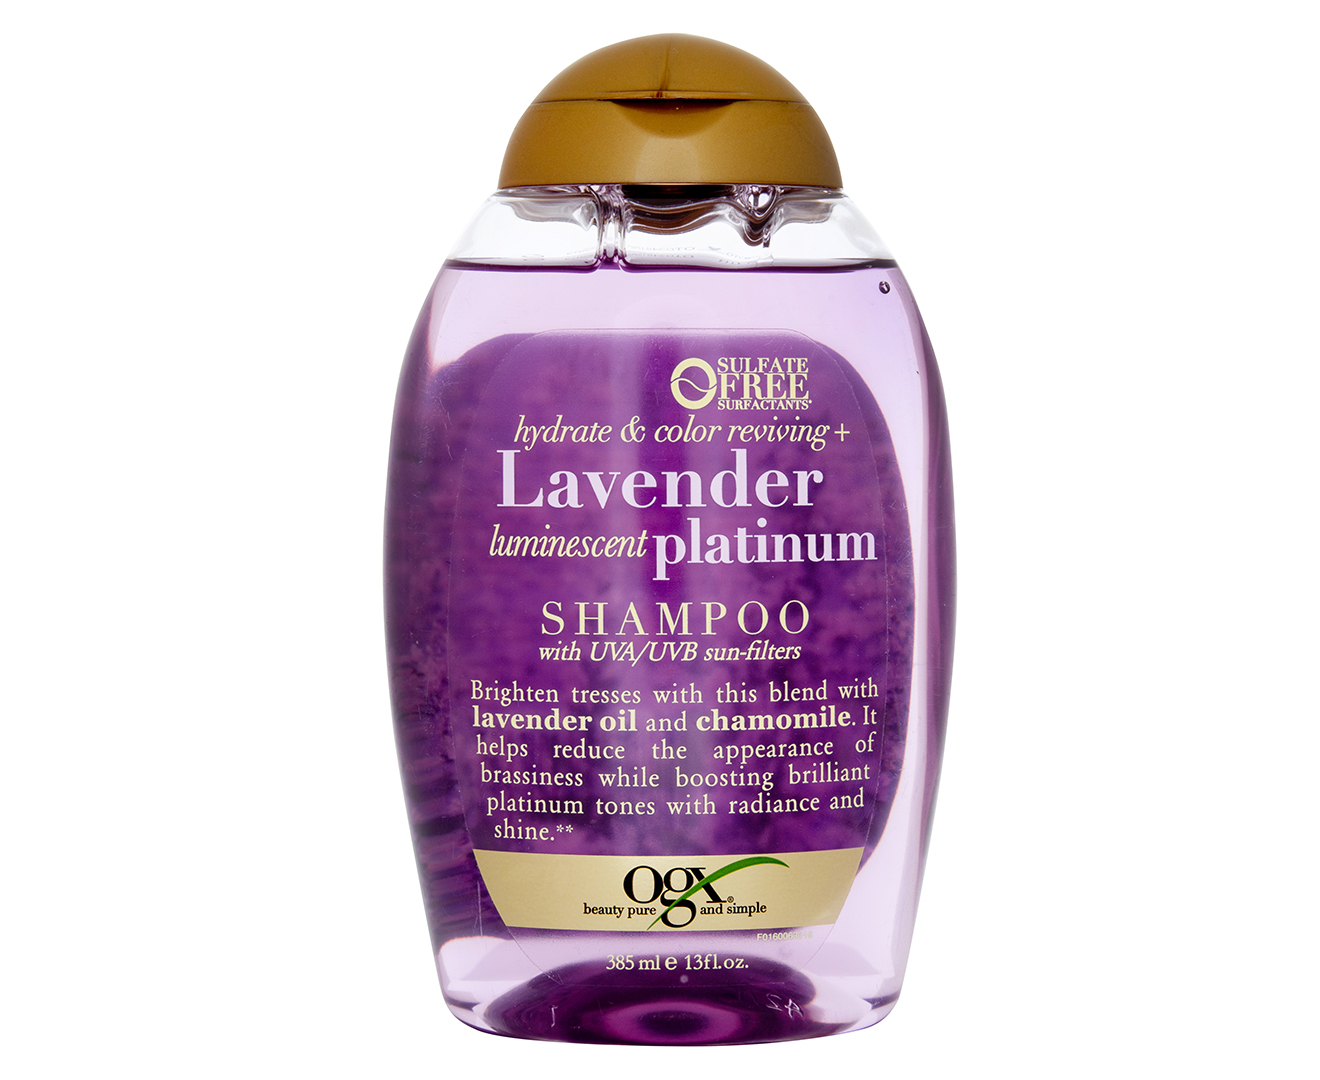 3. OGX Hydrate & Color Reviving + Lavender Luminescent Platinum Shampoo - wide 6